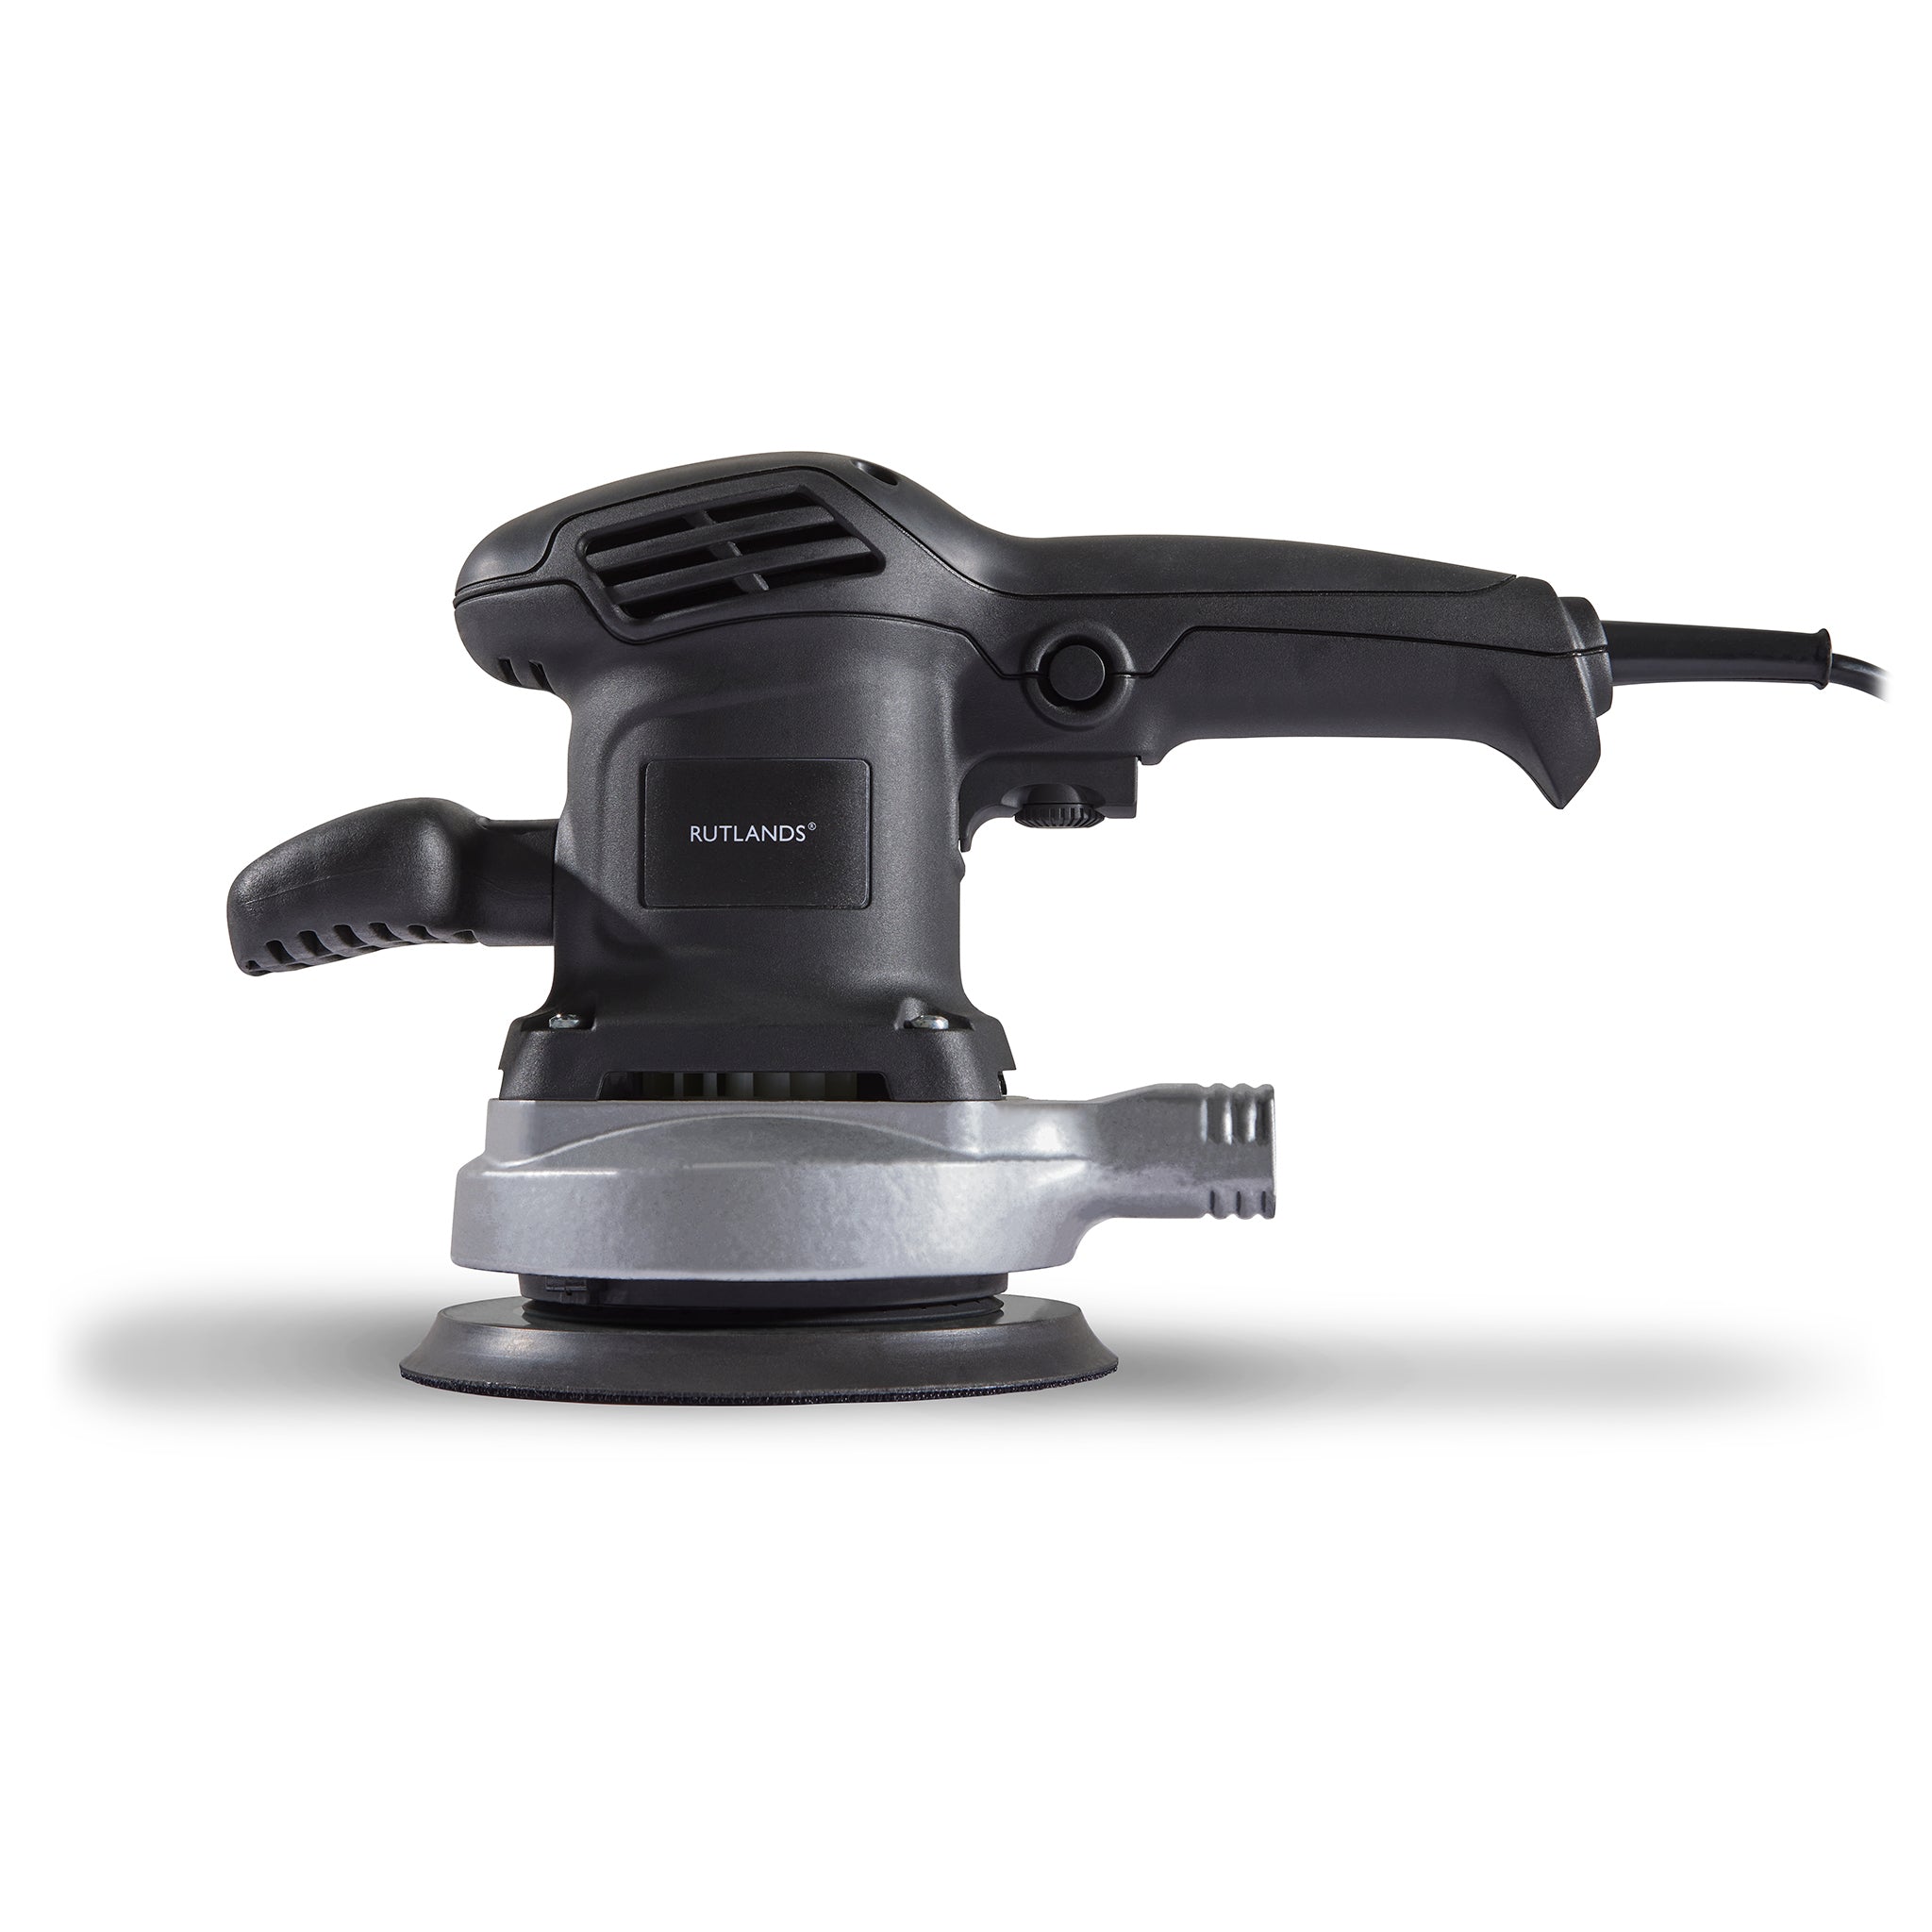 An image of a random orbital sander without the dust bag connected